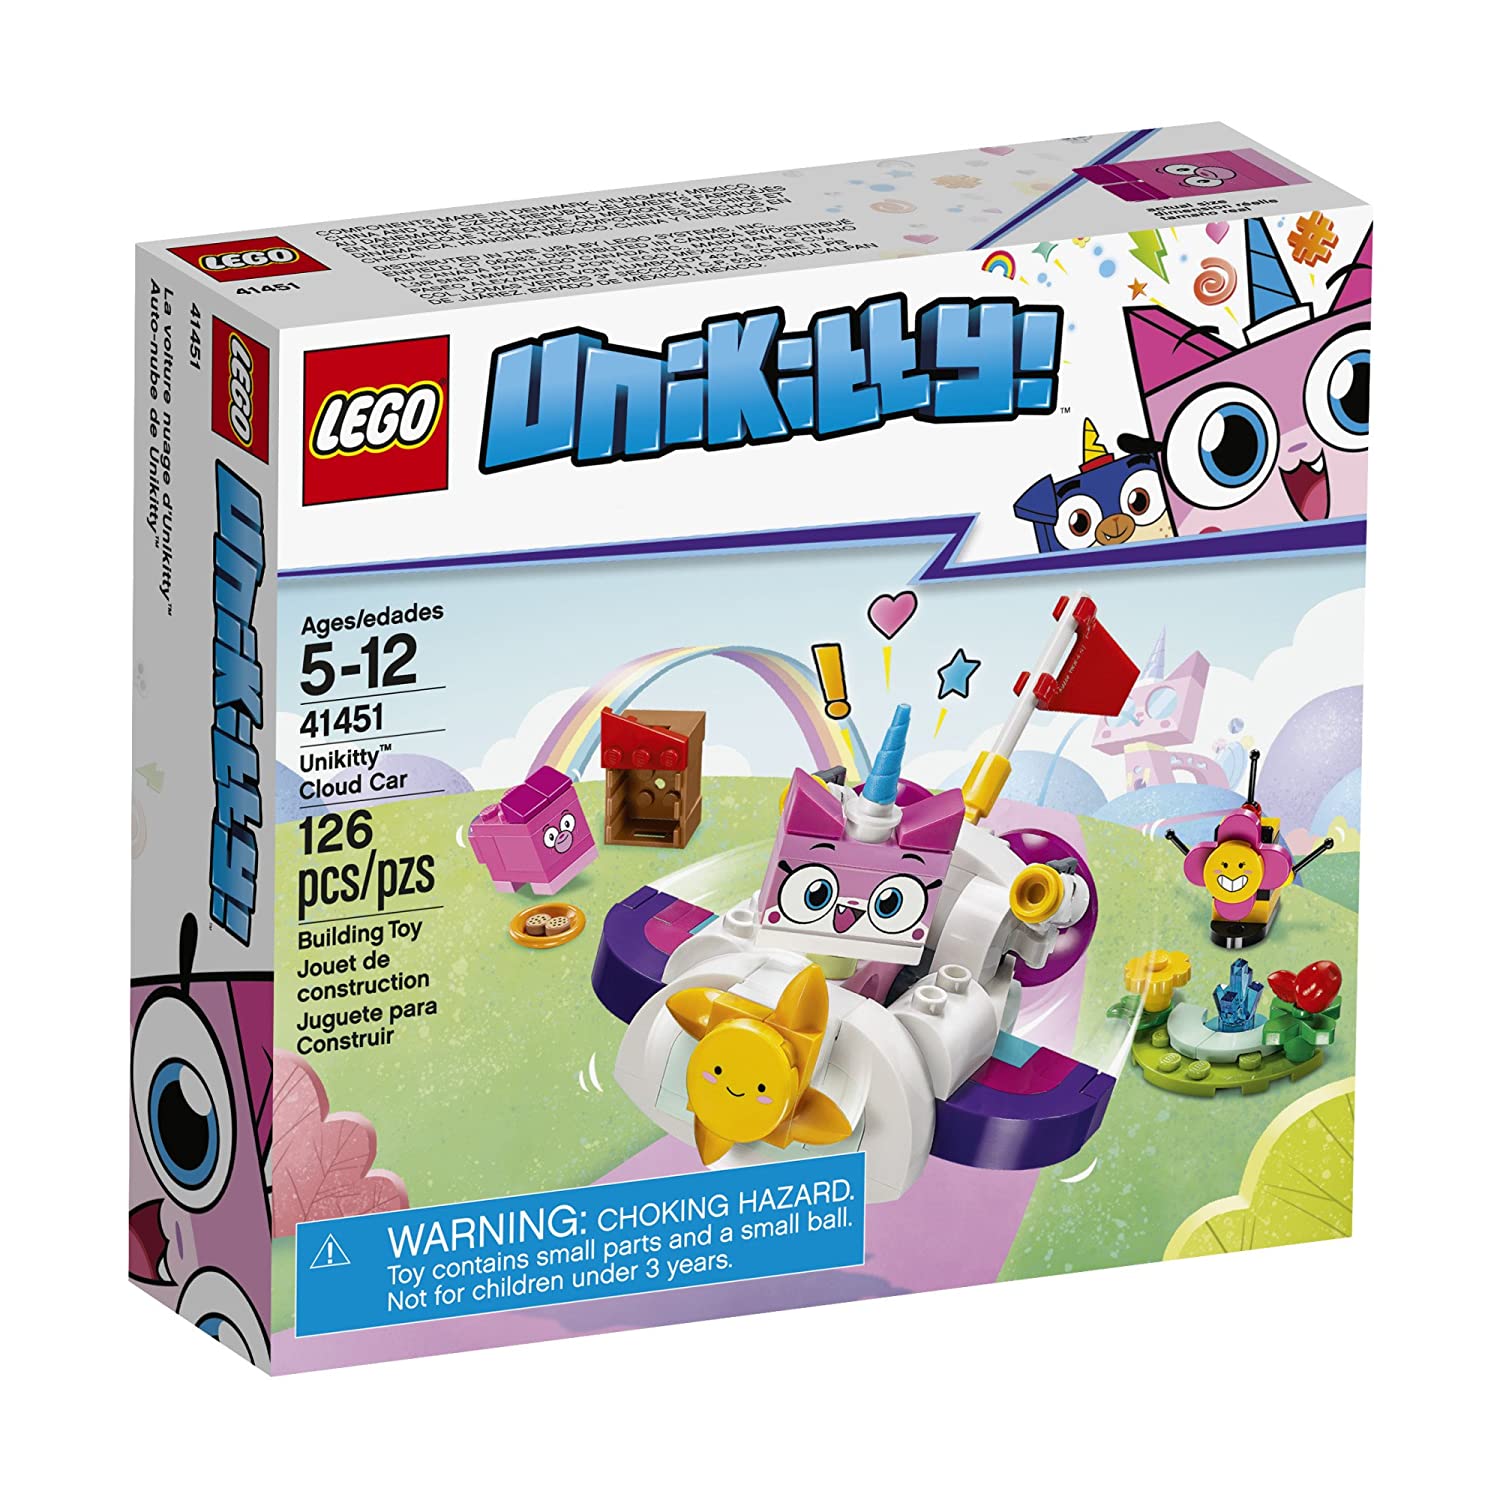 Top 7 Best LEGO Unikitty Sets Reviews in 2022 3